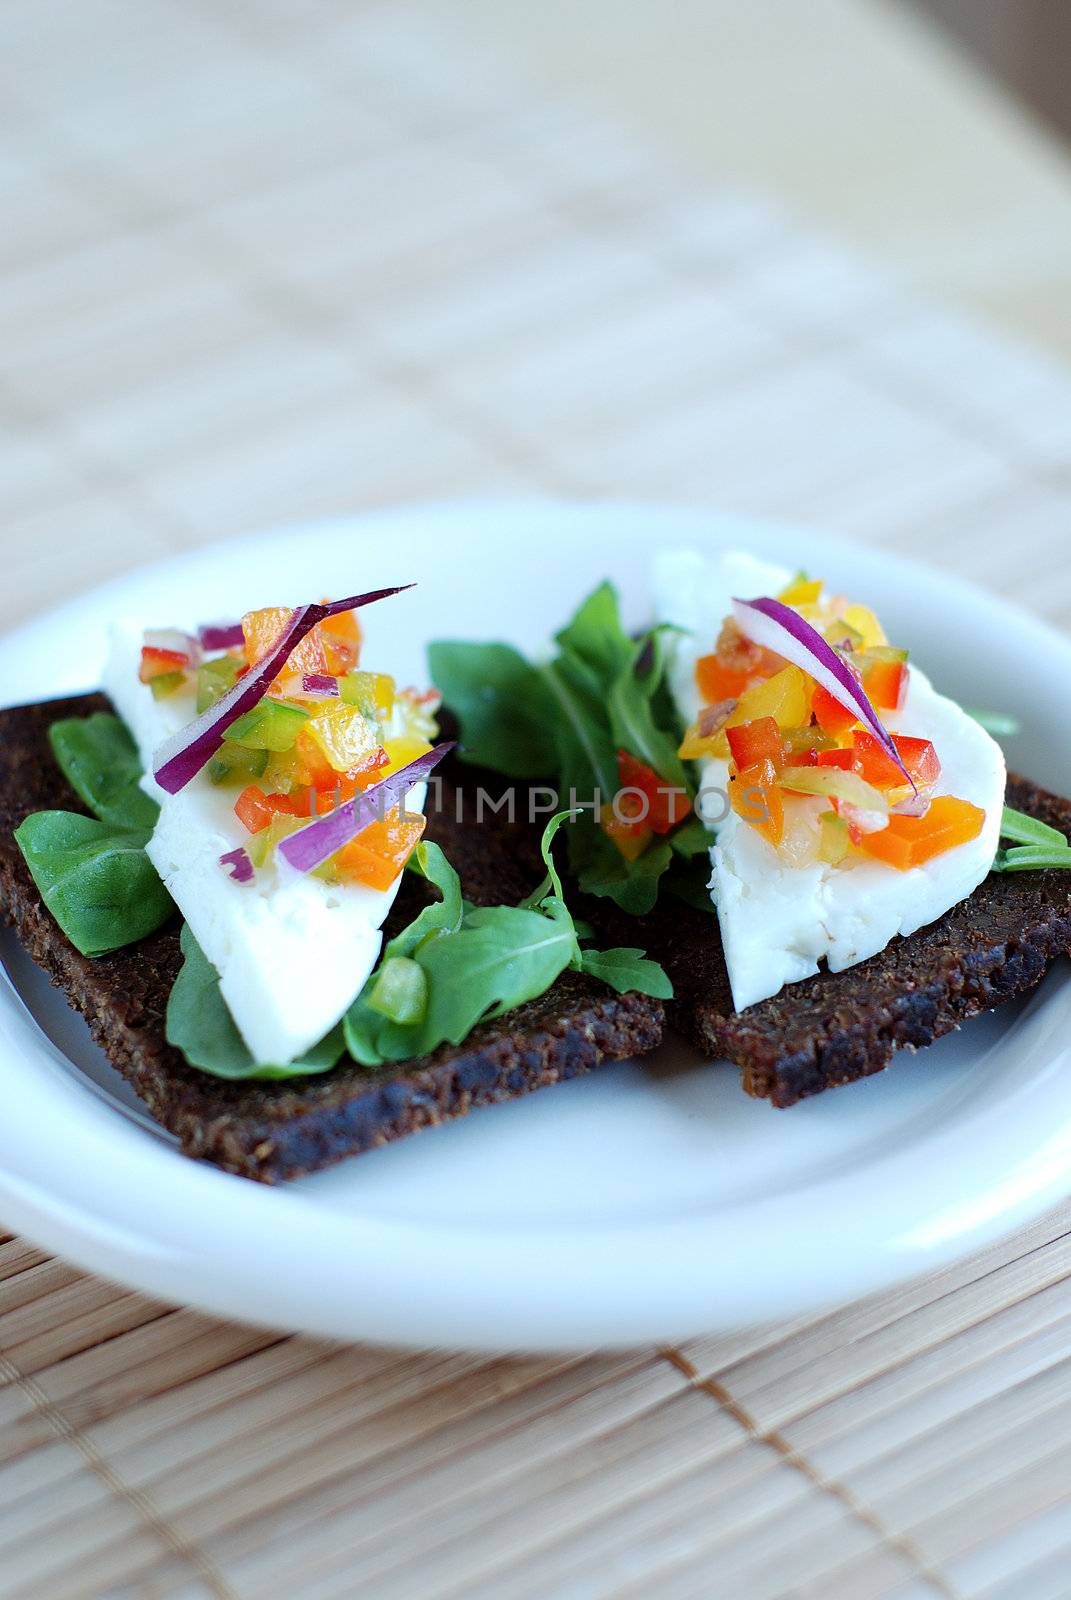 Pumpernickel and haloumi cheese sandwich